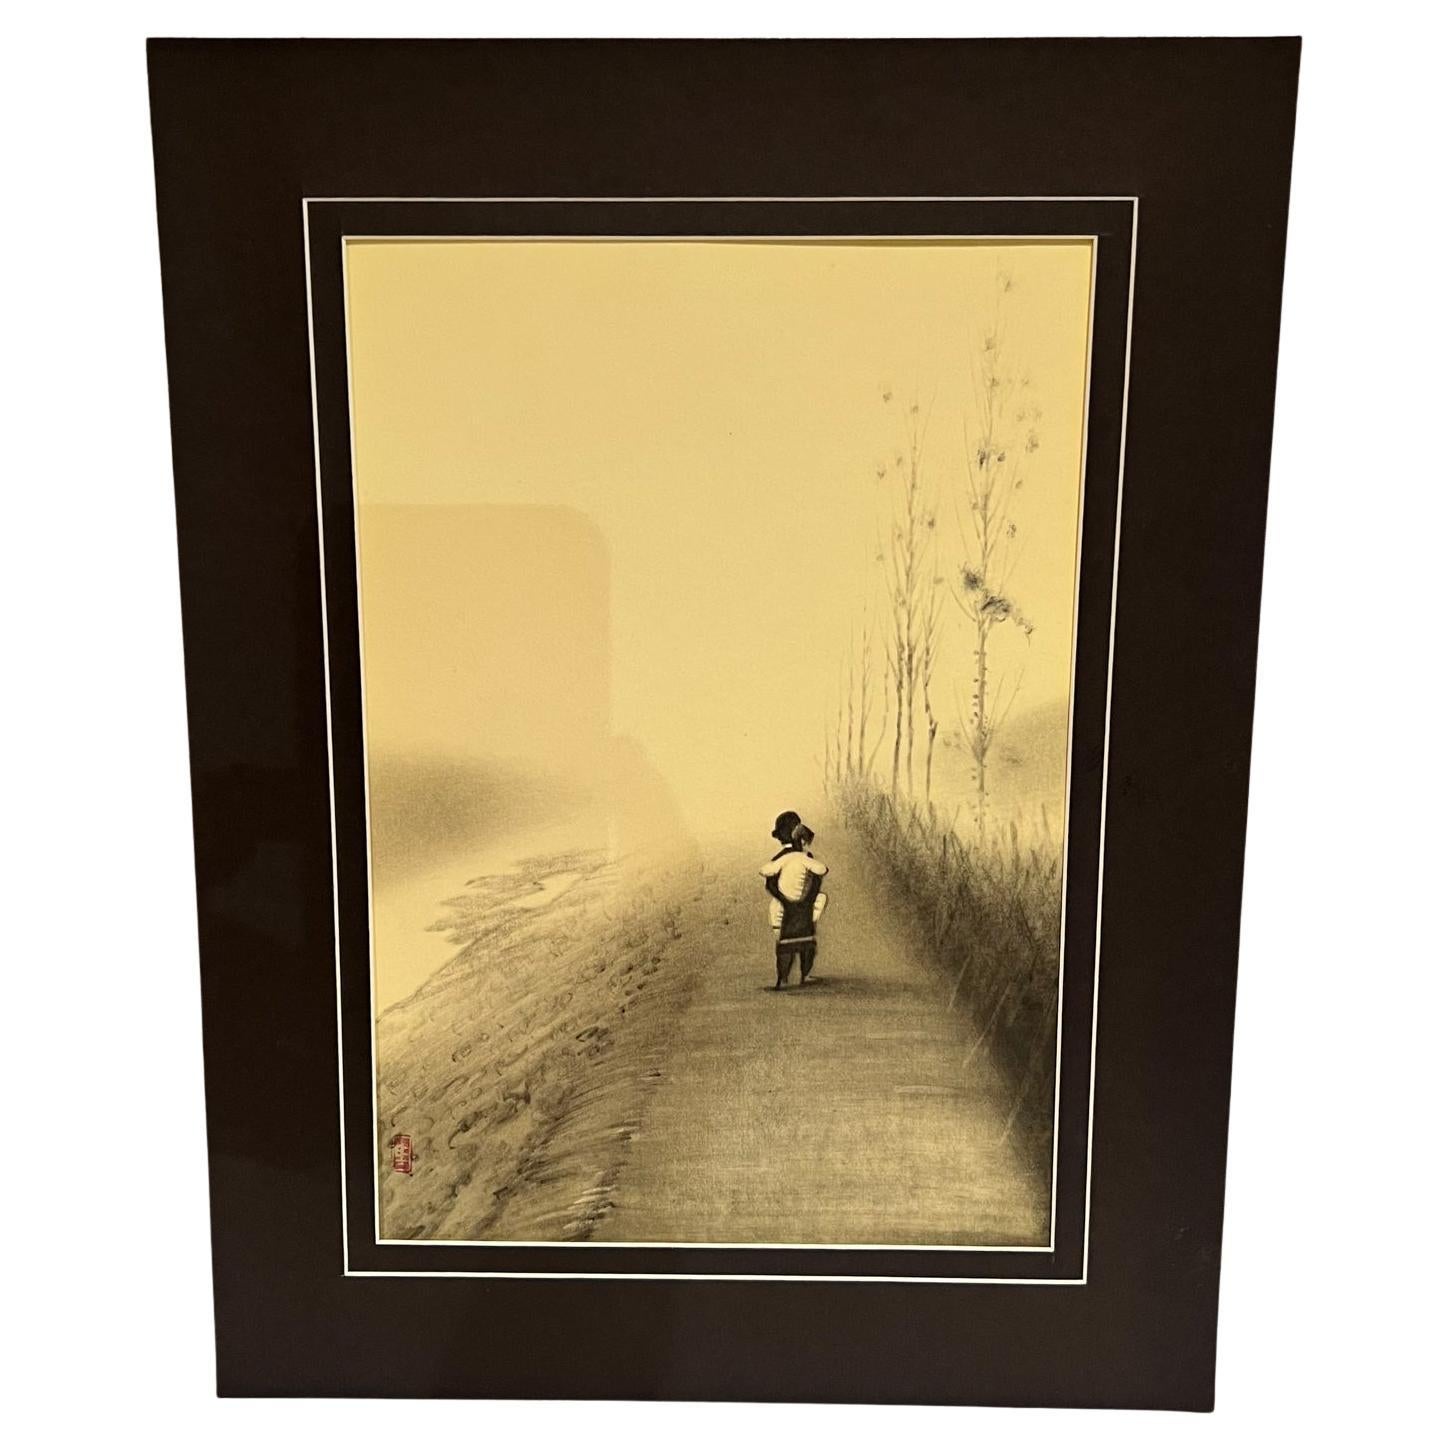 1960s Fine Chinese Art Child Being Carried on Man's Back Scenic Road Travel For Sale